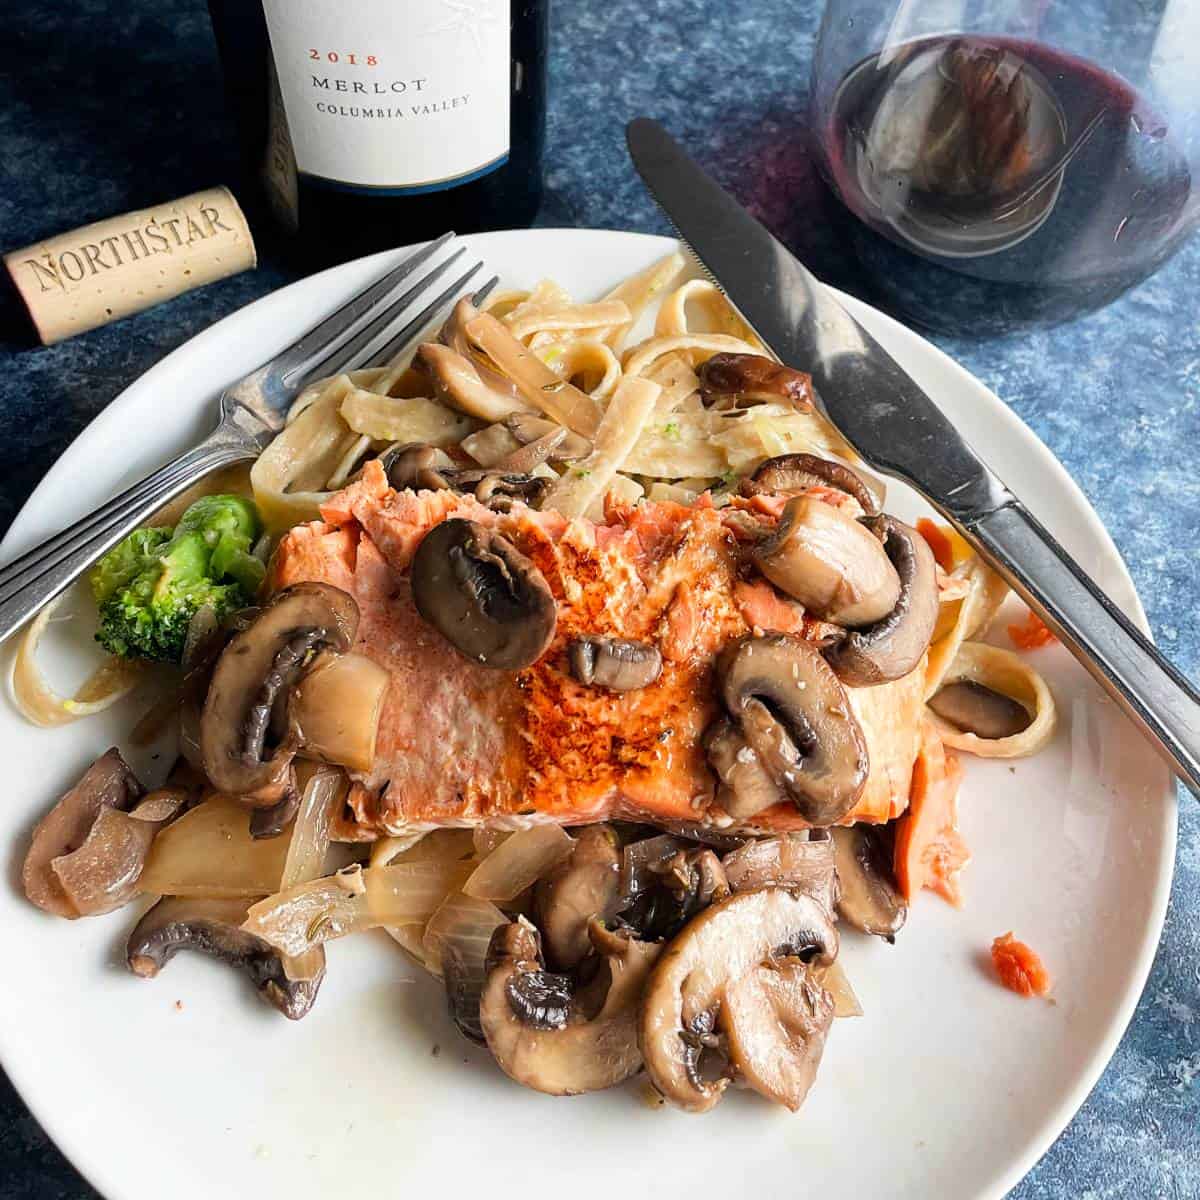 salmon topped with mushrooms, served with pasta and red wine in the background.